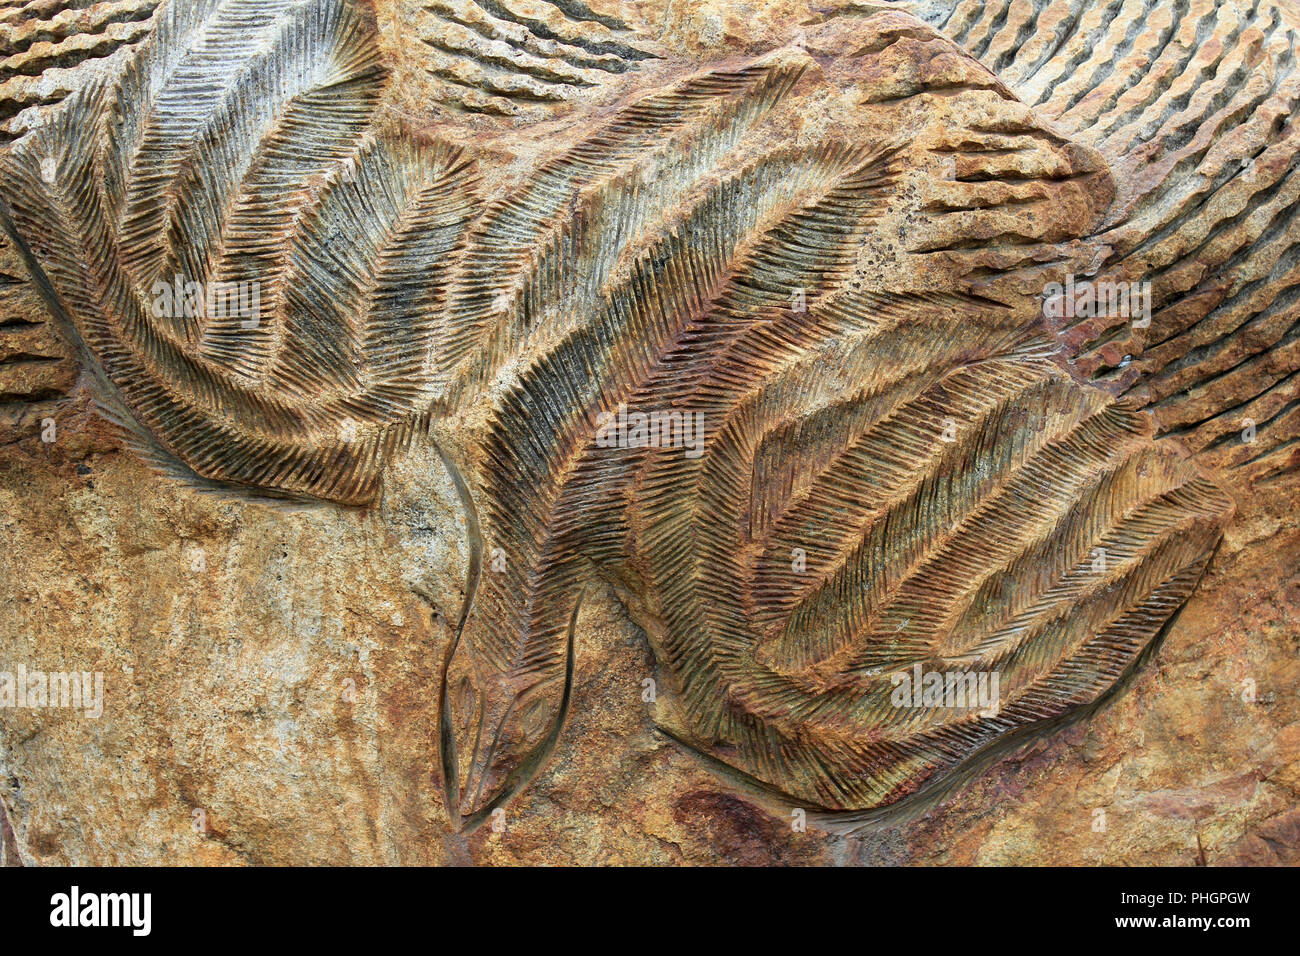 Inuit Eagle Carving Stockfoto